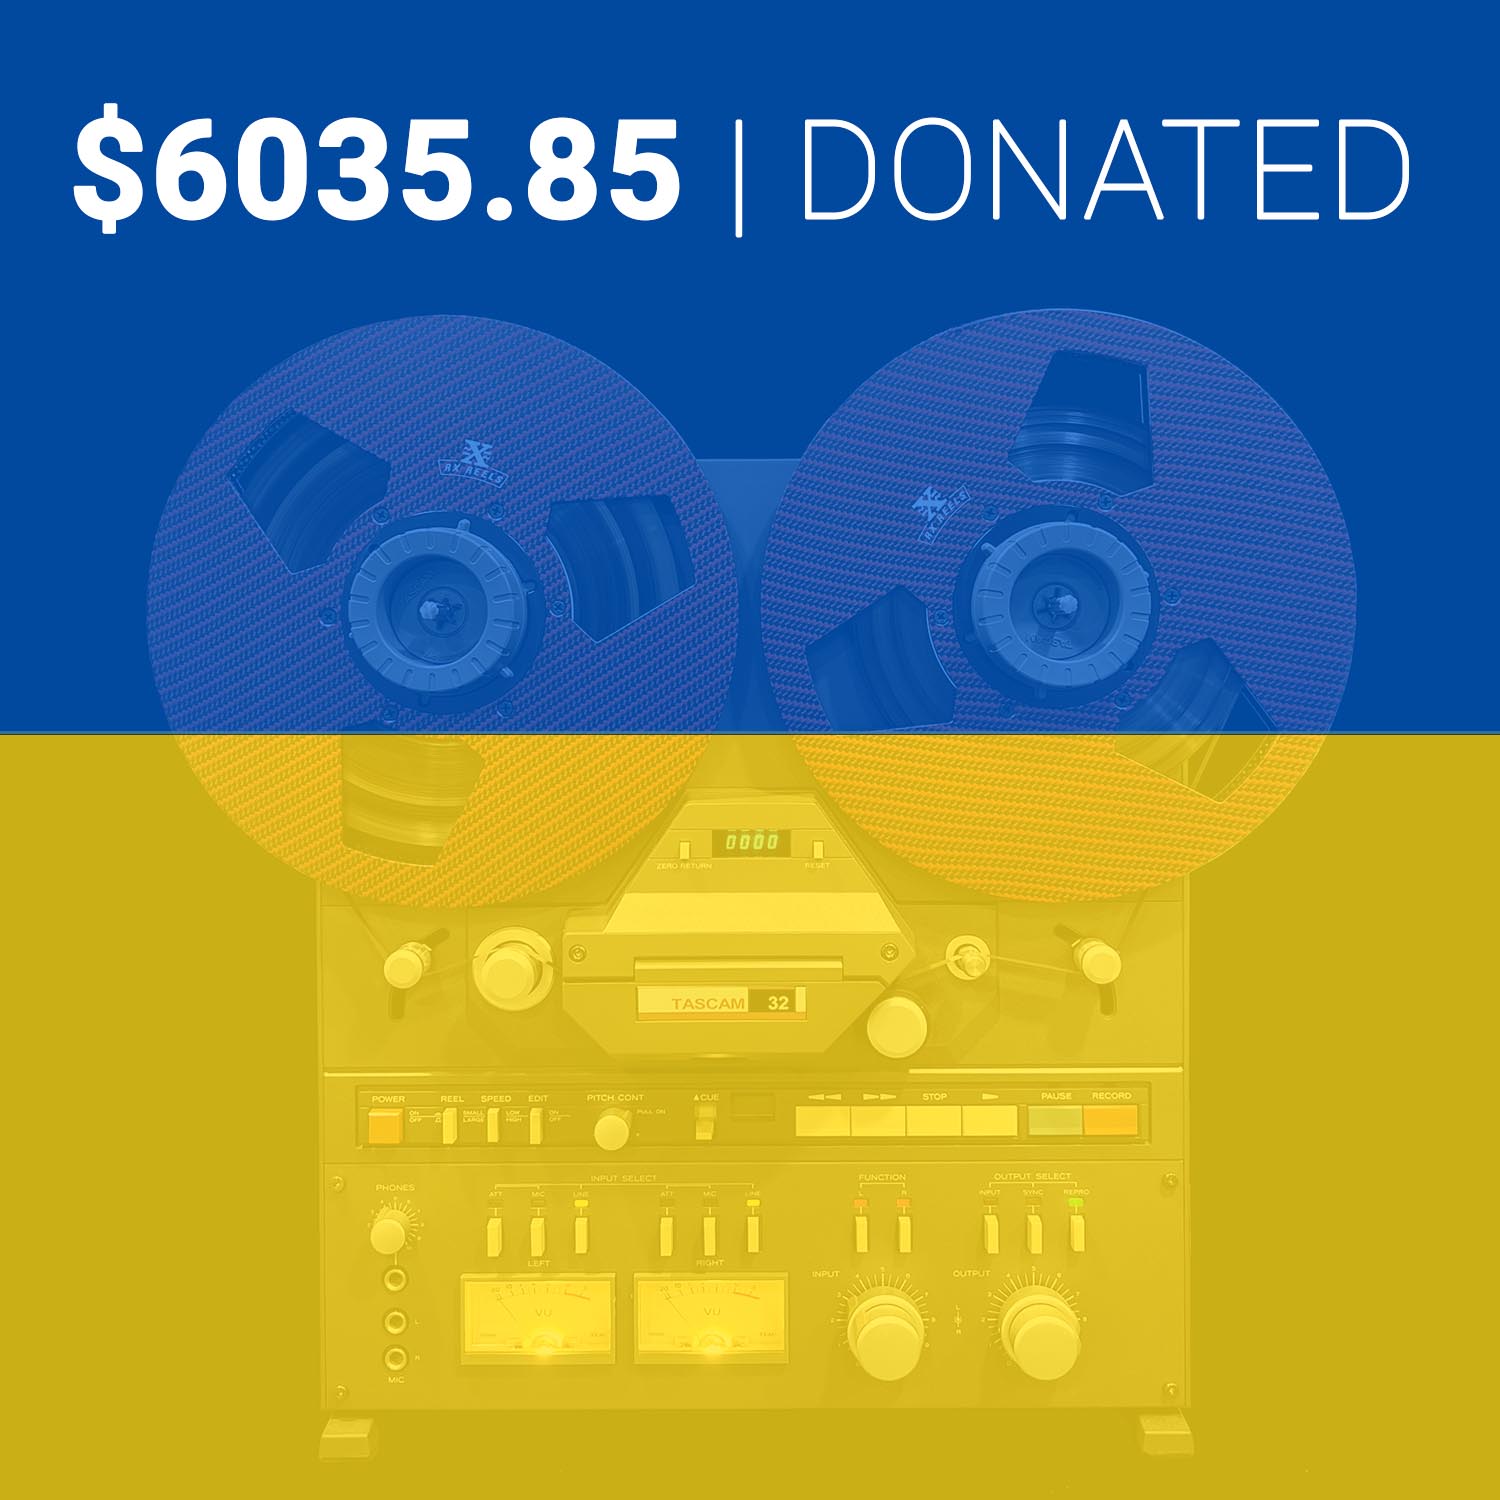 UKRAINE REFUGEE FUNDRAISER - THANK YOU TO ALL WHO DONATED!